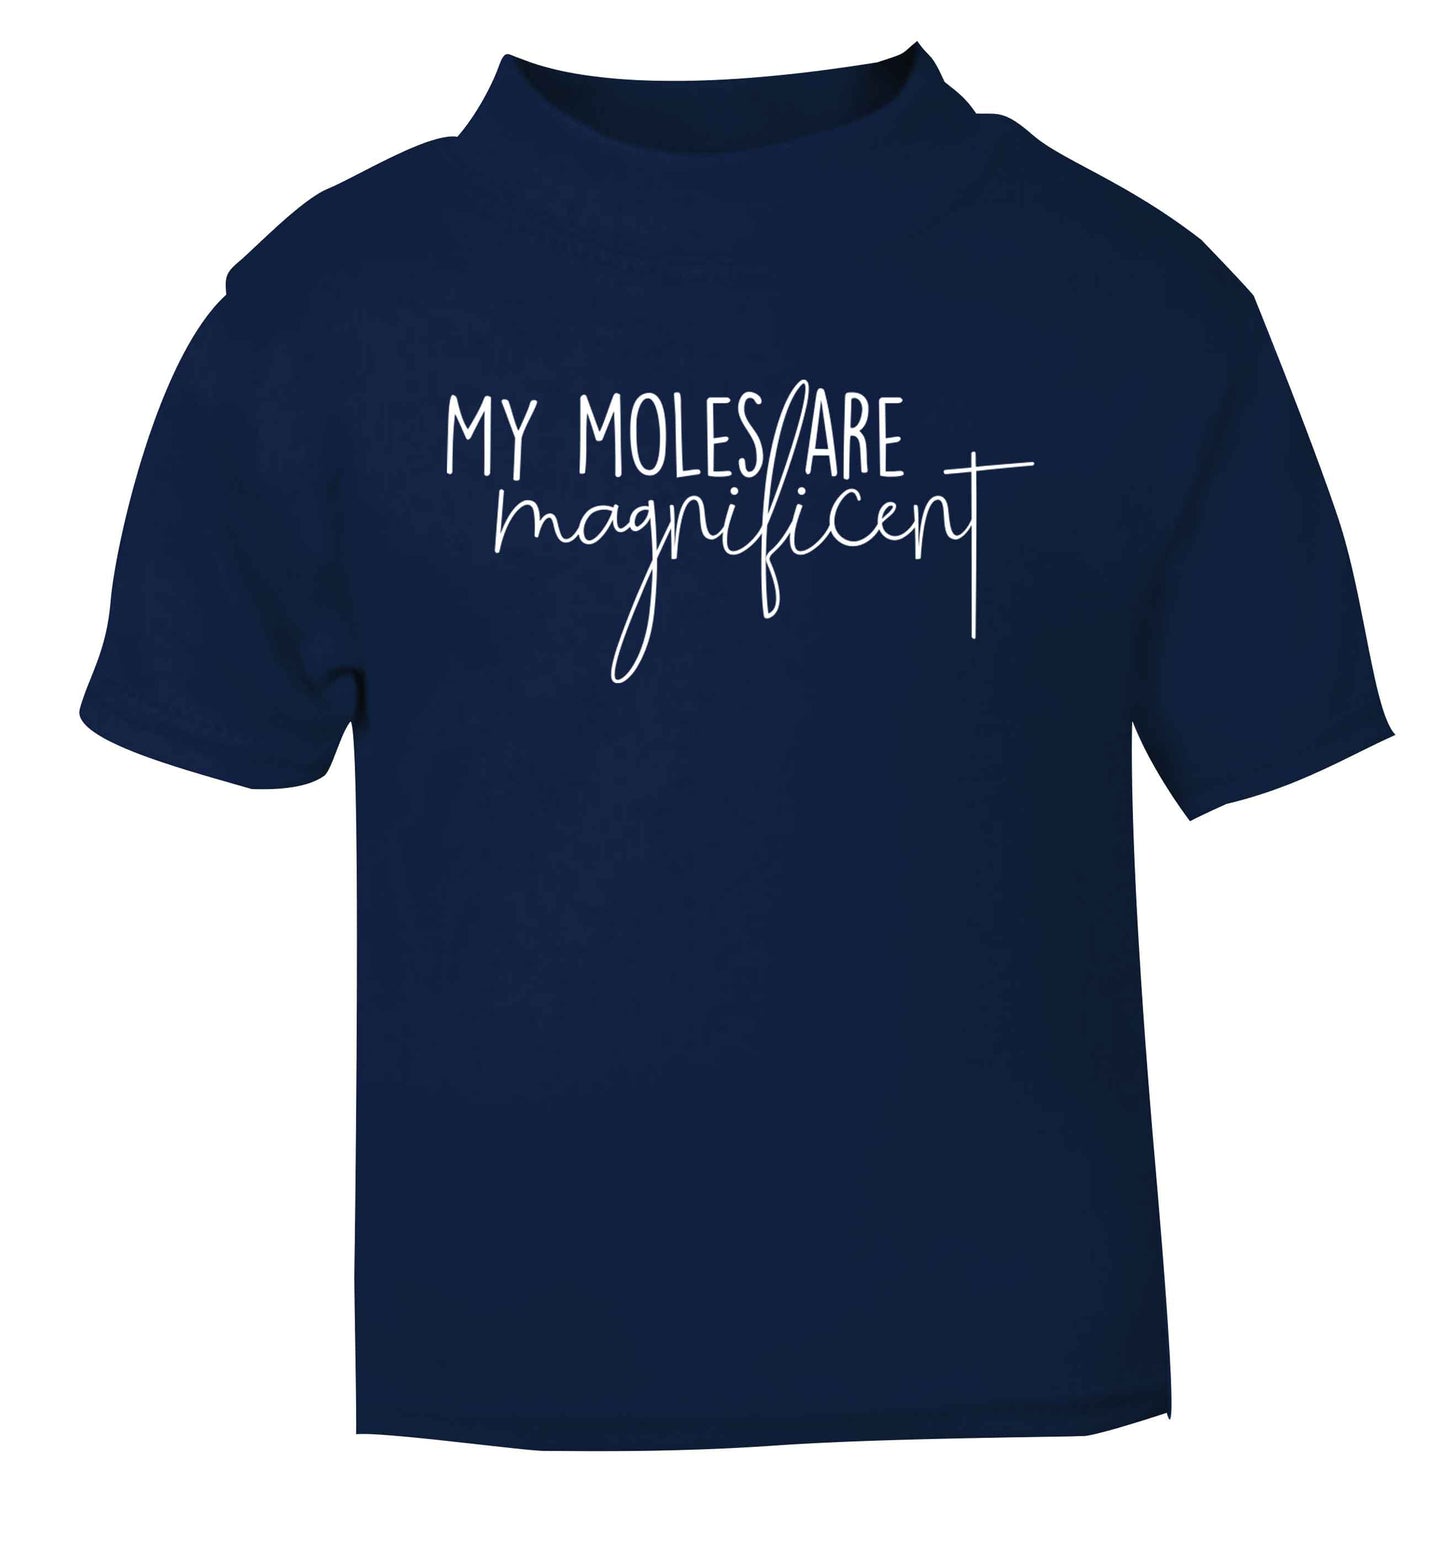 My moles are magnificent navy baby toddler Tshirt 2 Years